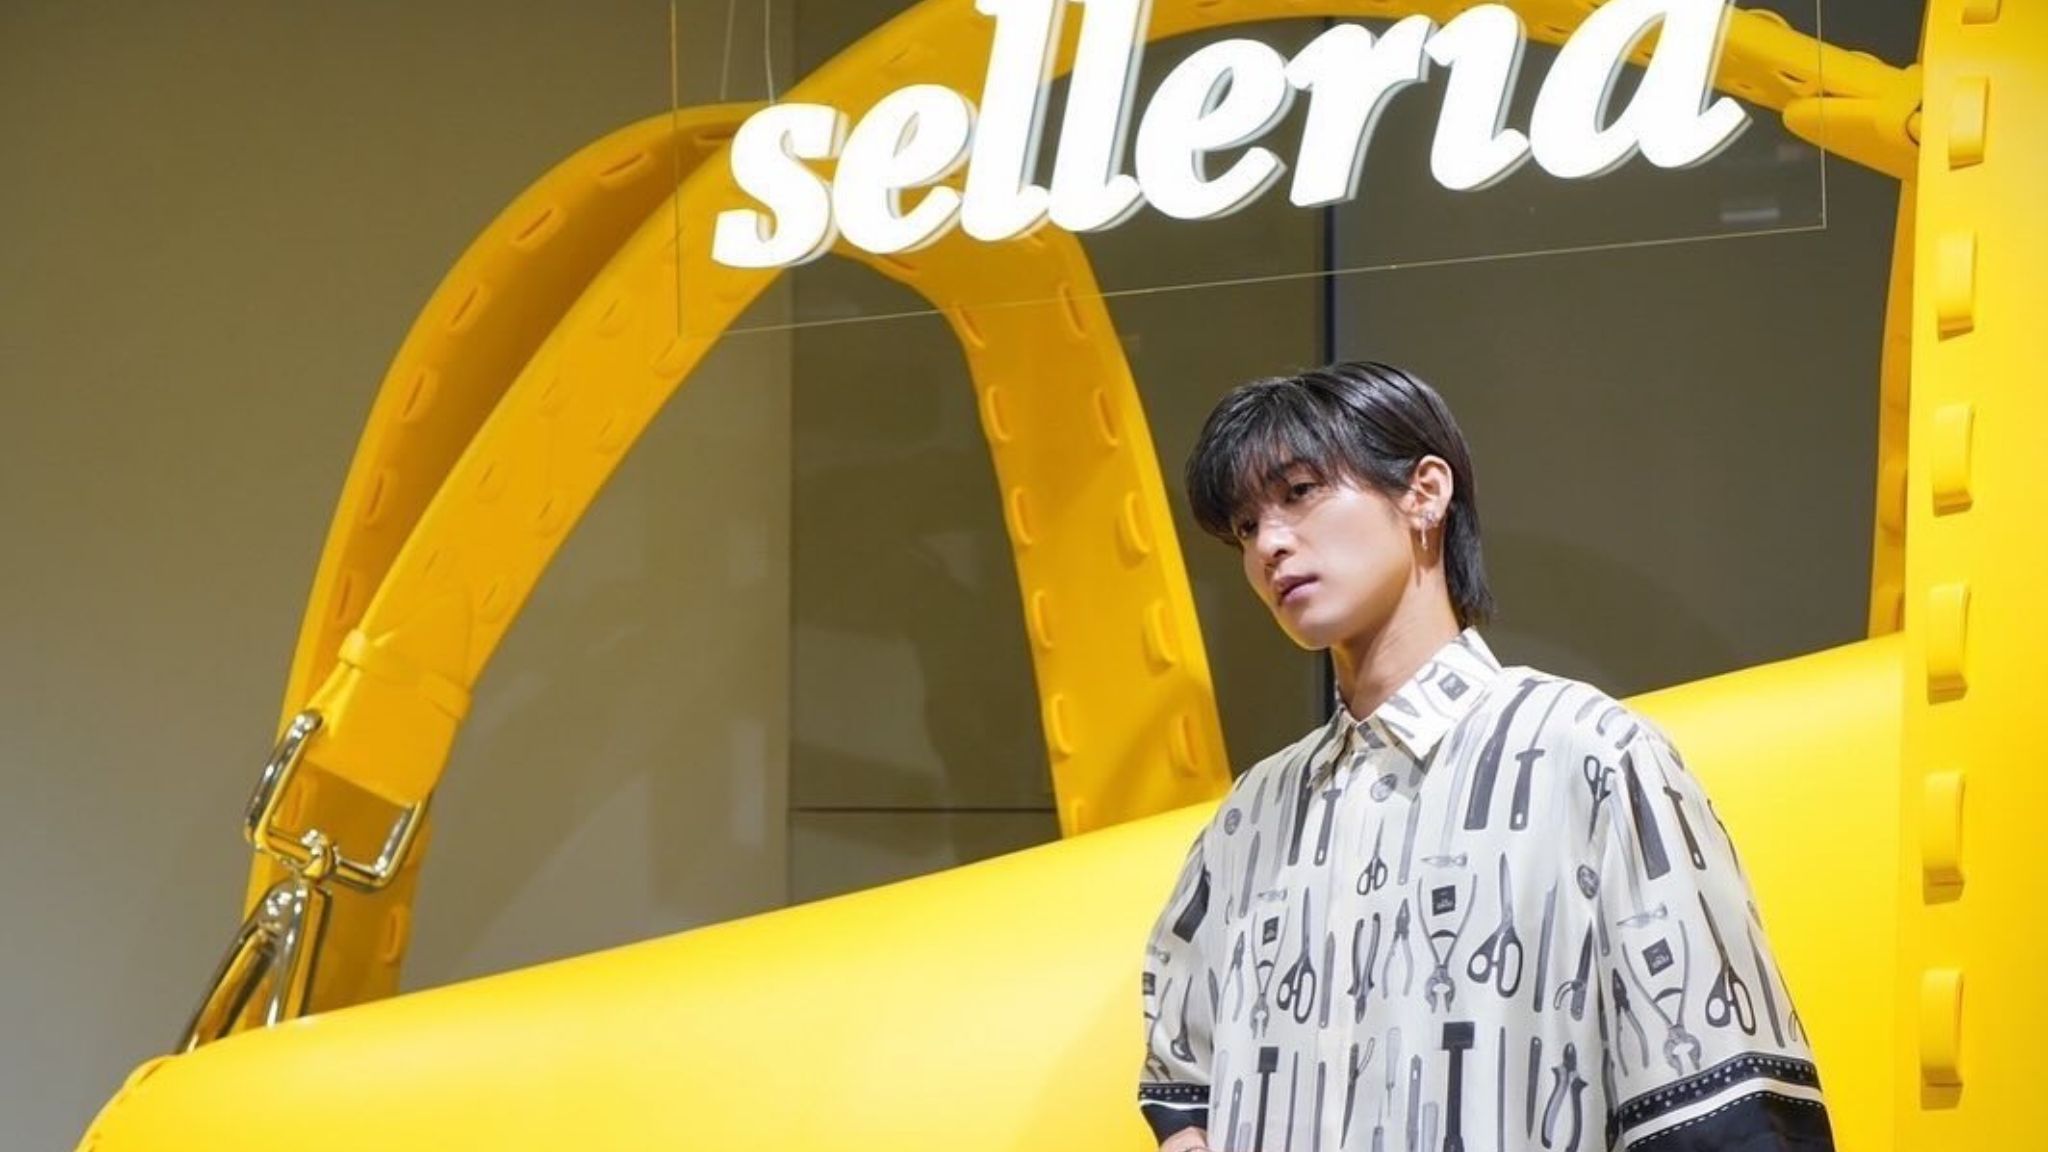 Ren Meguro and Others at the Opening of the FENDI Selleria Pop-Up Store in Shibuya